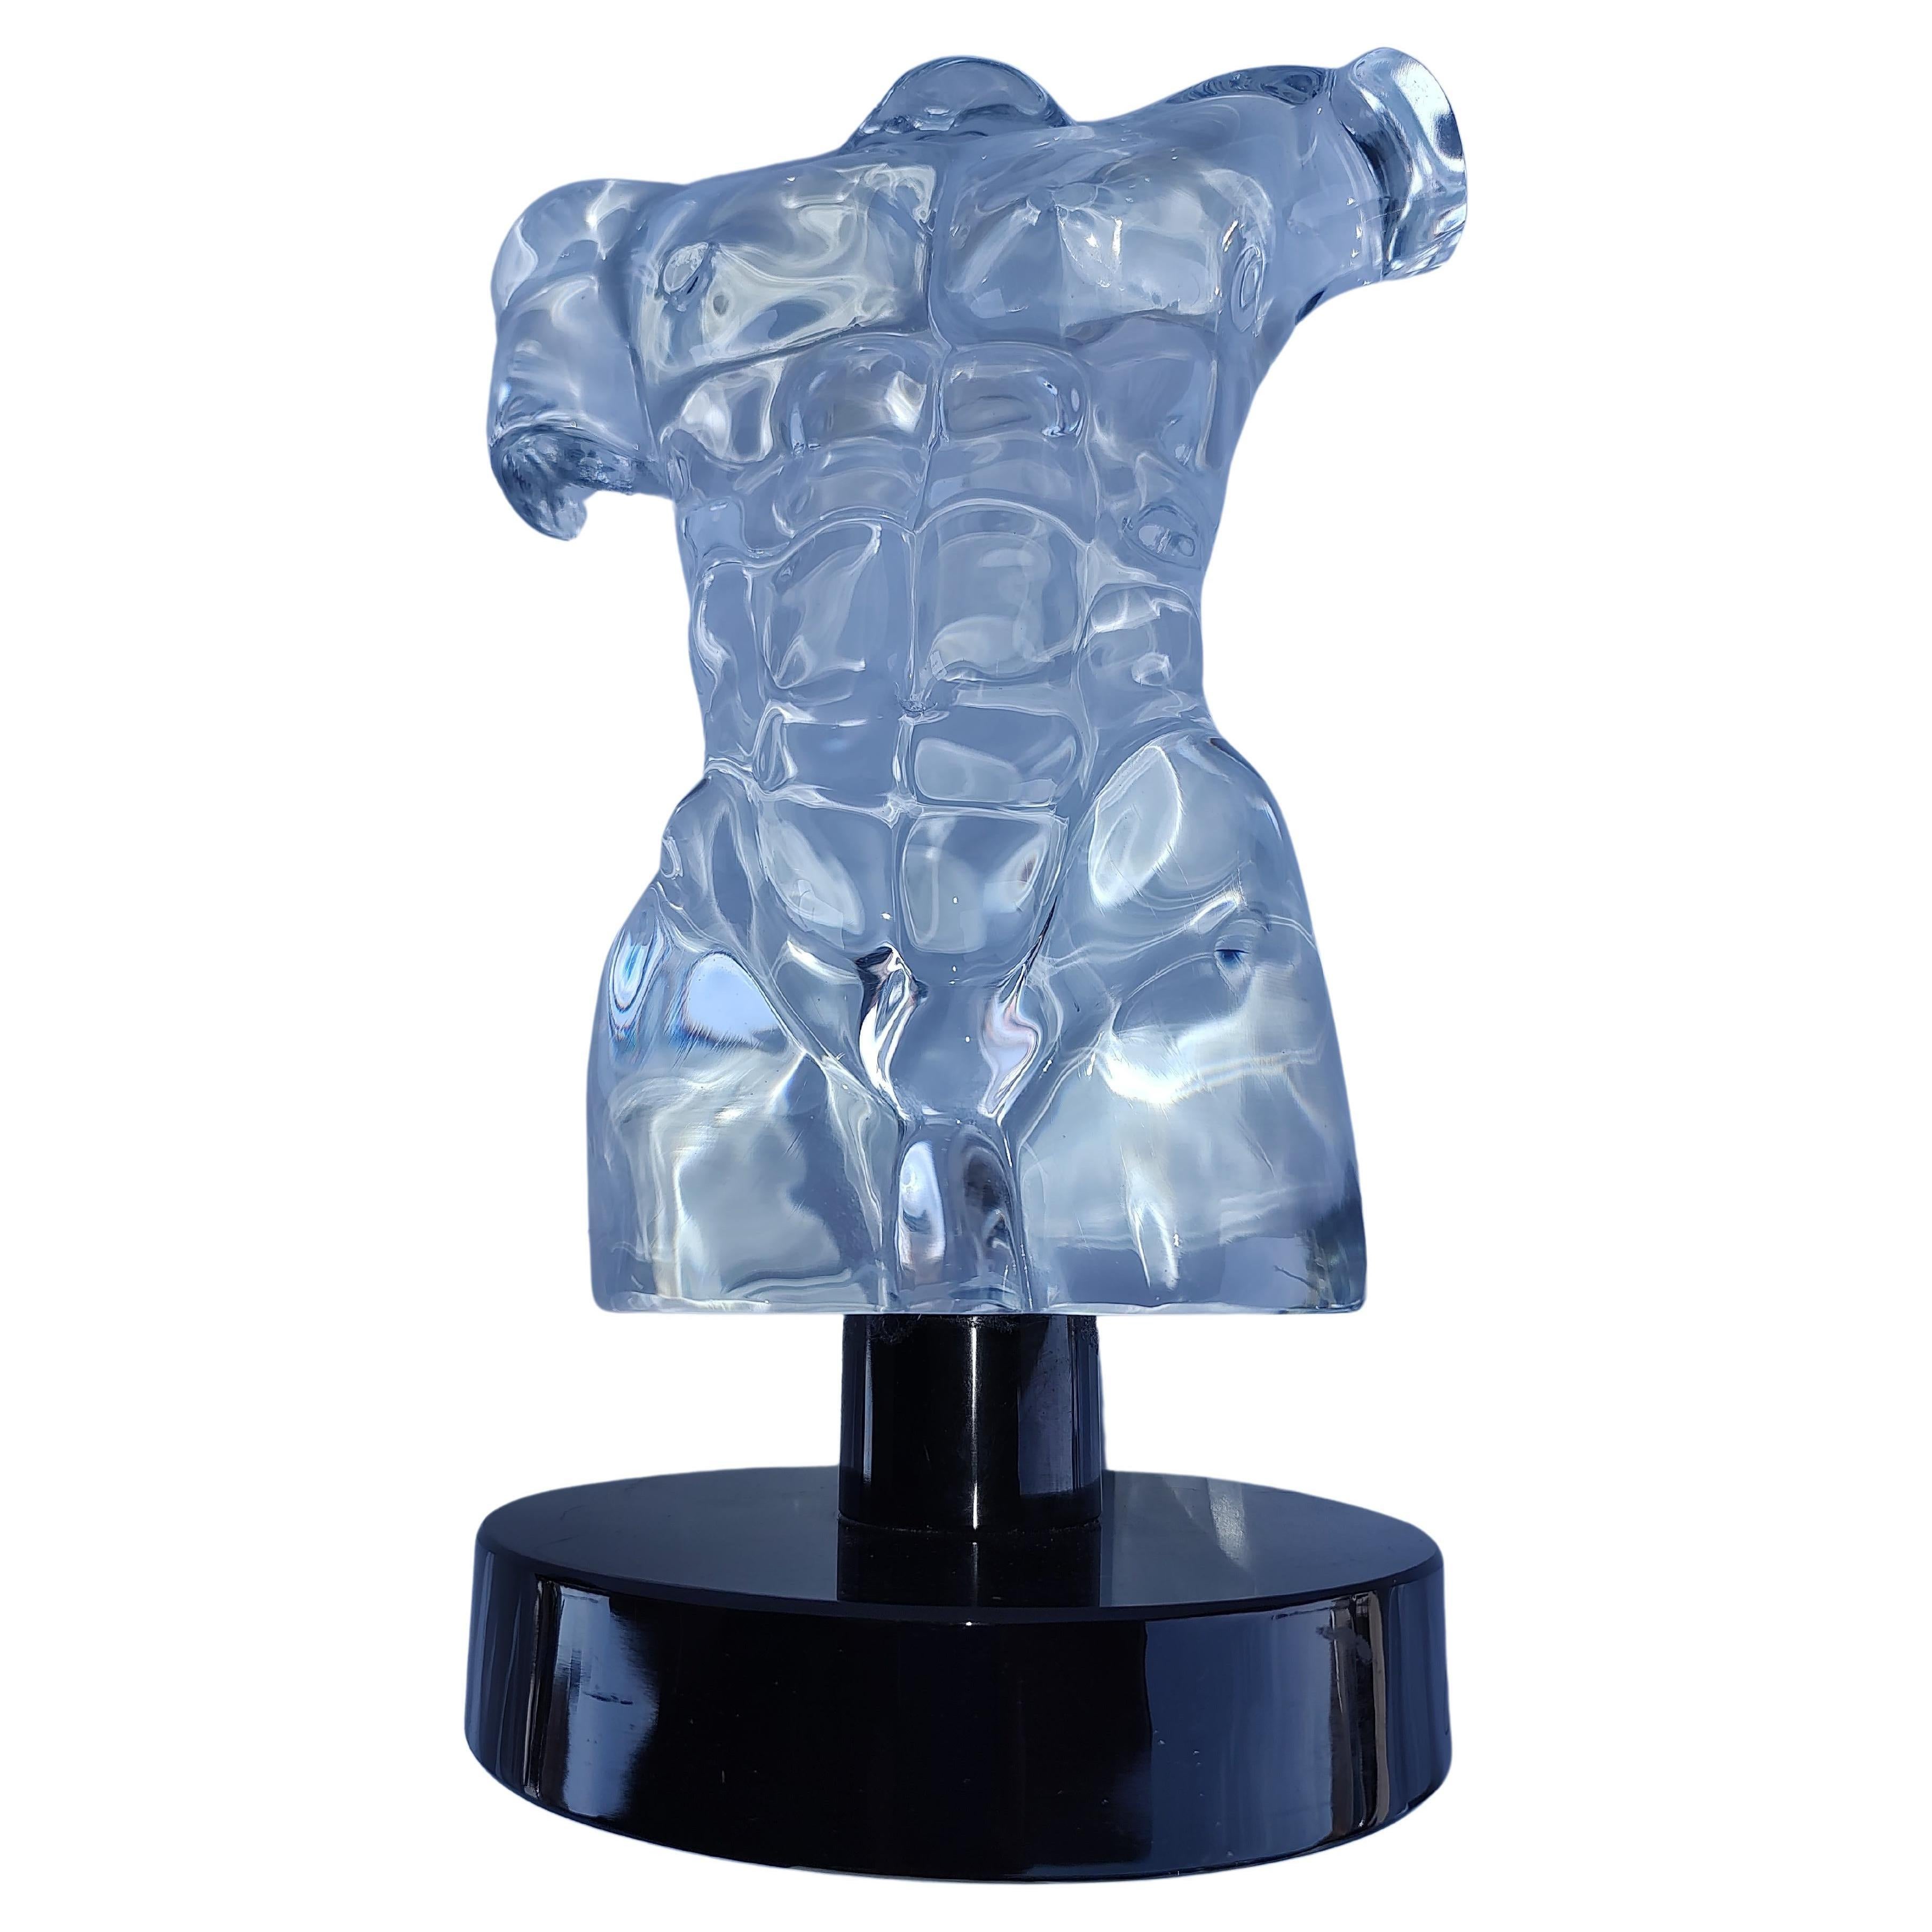 Fabulous glass sculpture of Adonis in bust form on a black glass plinth by Dino Rosin. Murano, Venice Italy. Signed in numerous places. In excellent condition.